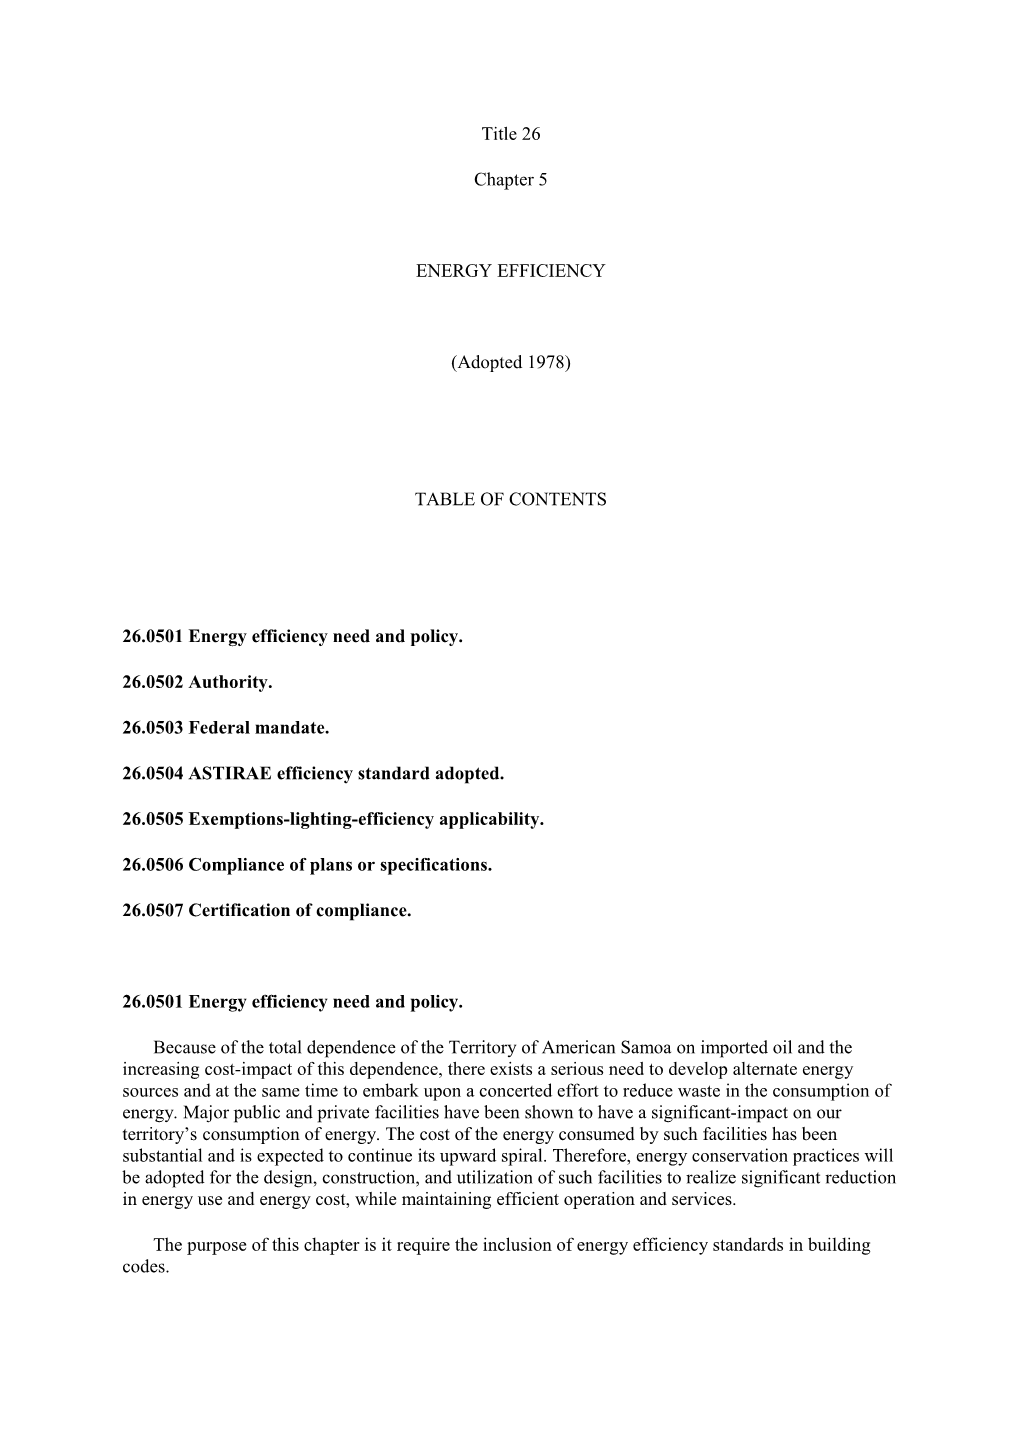 26.0501 Energy Efficiency Need and Policy